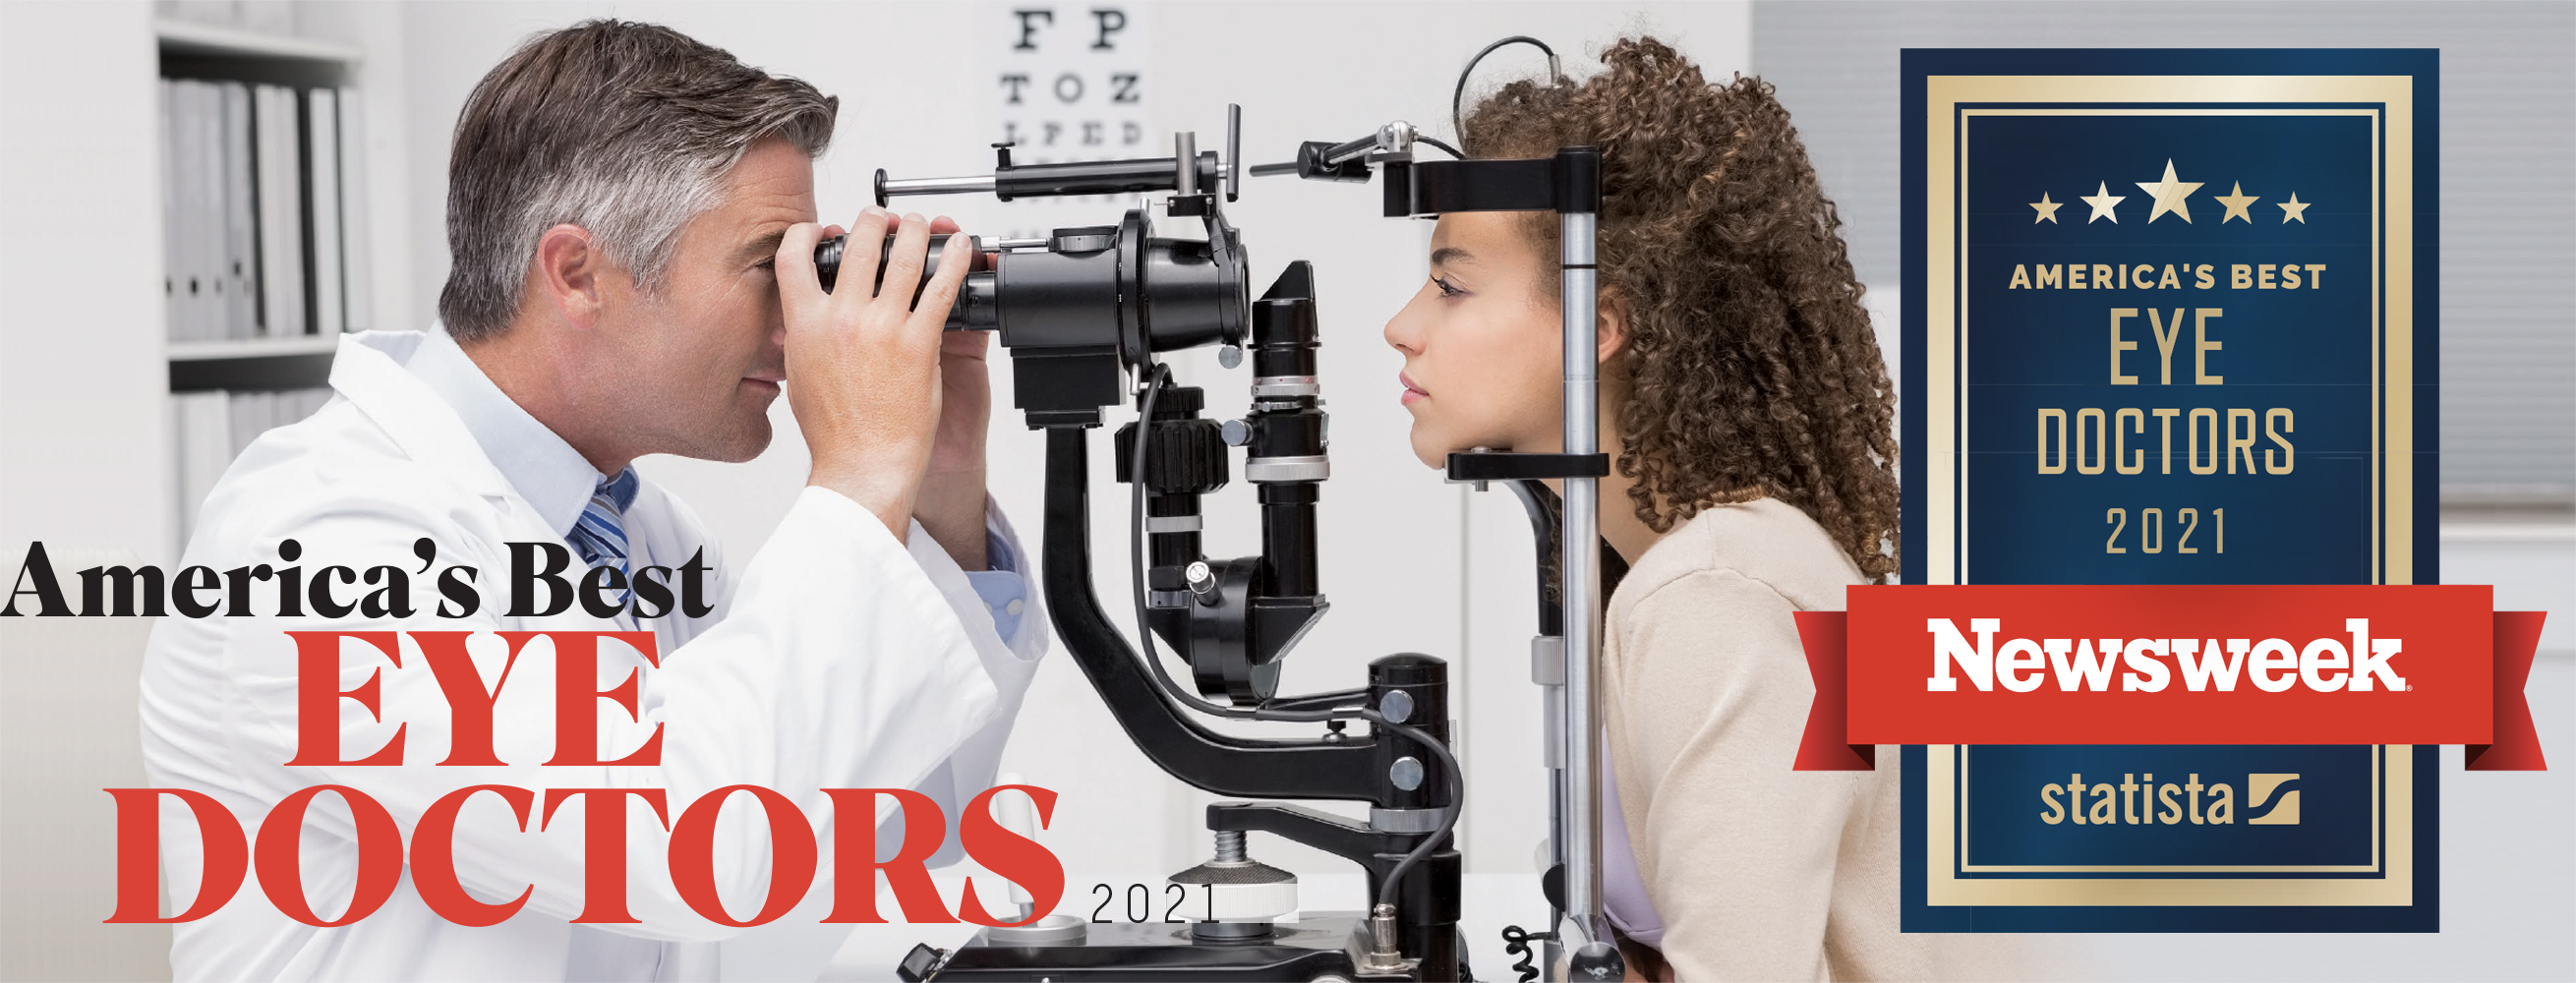 America's Best Eye Doctors 2021 Ophthalmologists